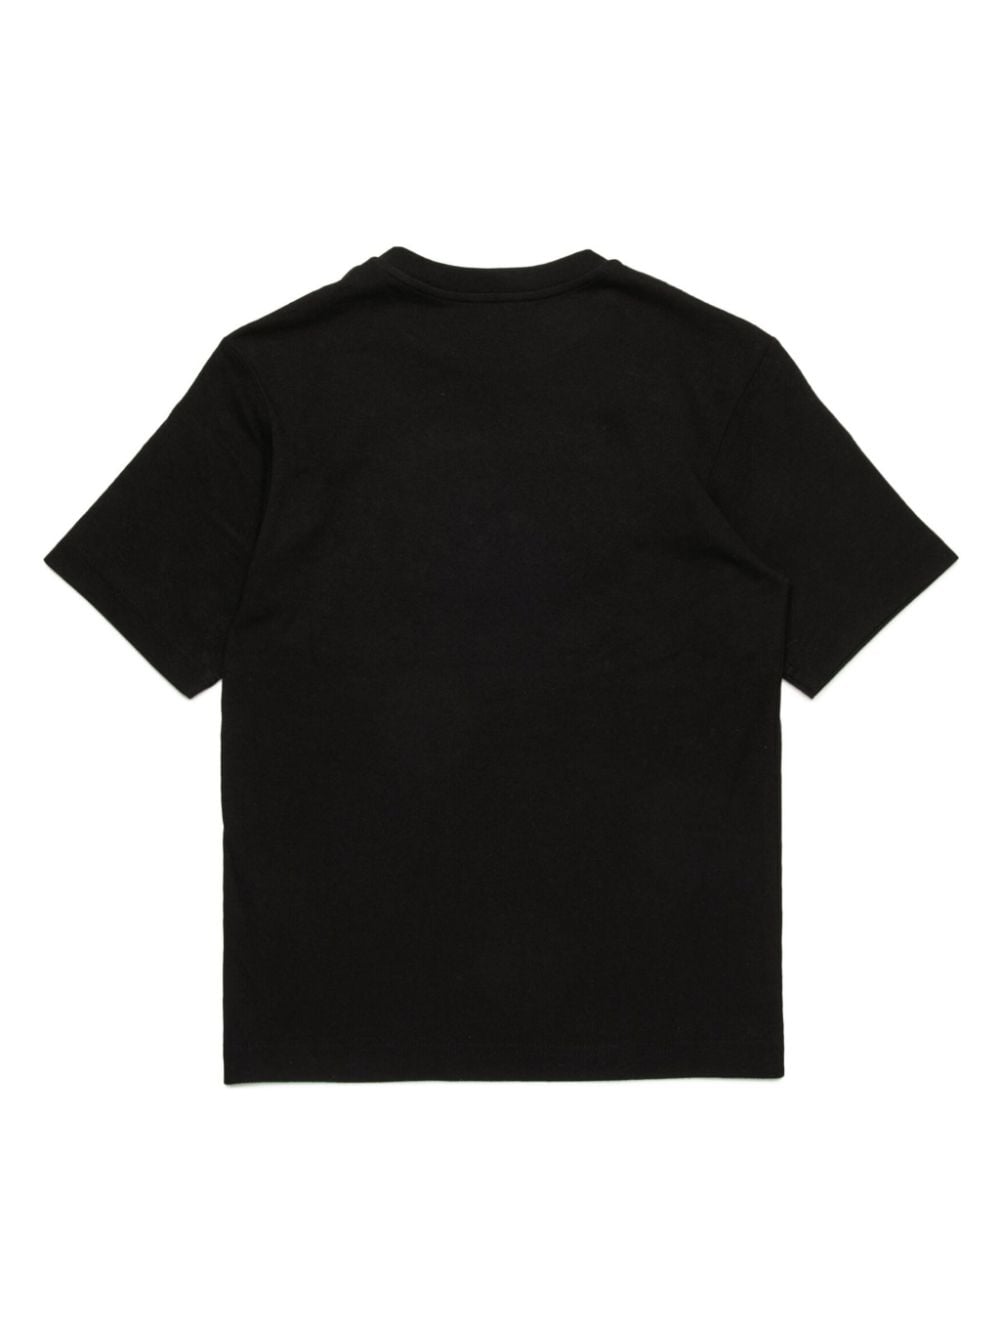 Black cotton t-shirt for boys with logo